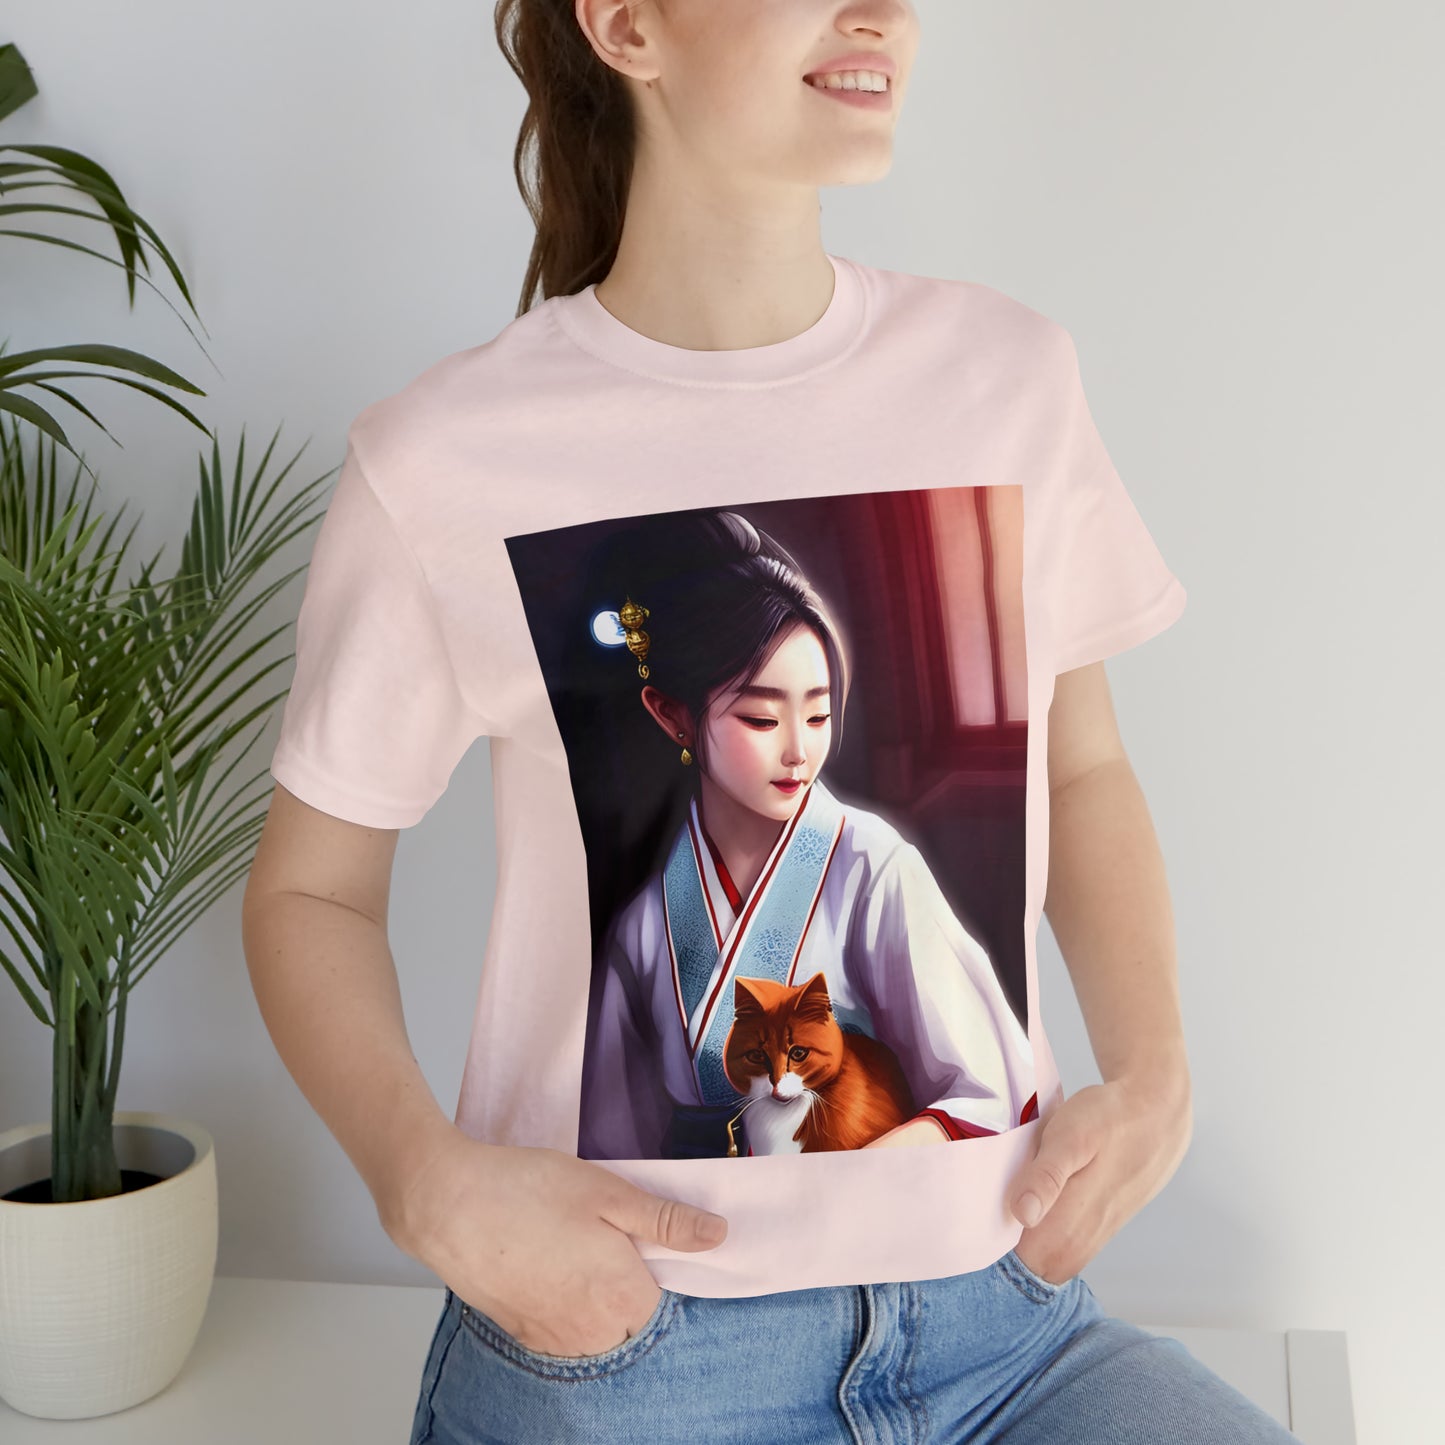 Geisha and ginger cat T-shirt, maiko cat shirt, feudal japan aesthetic cat Tee, girl in a kimono cat lover gift, anime cat aesthetic shirt